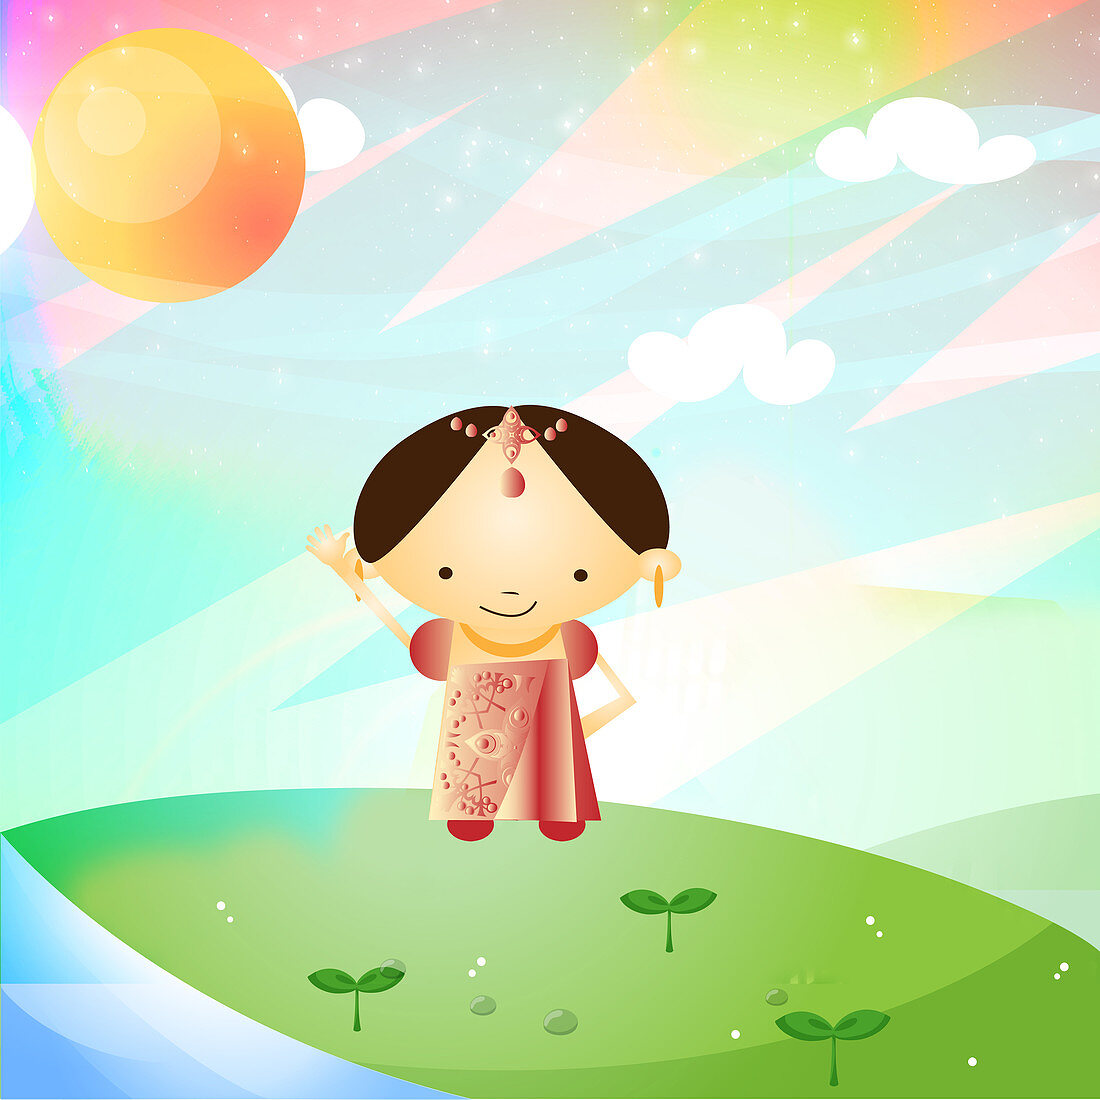 Girl standing in a field and smiling, India, illustration